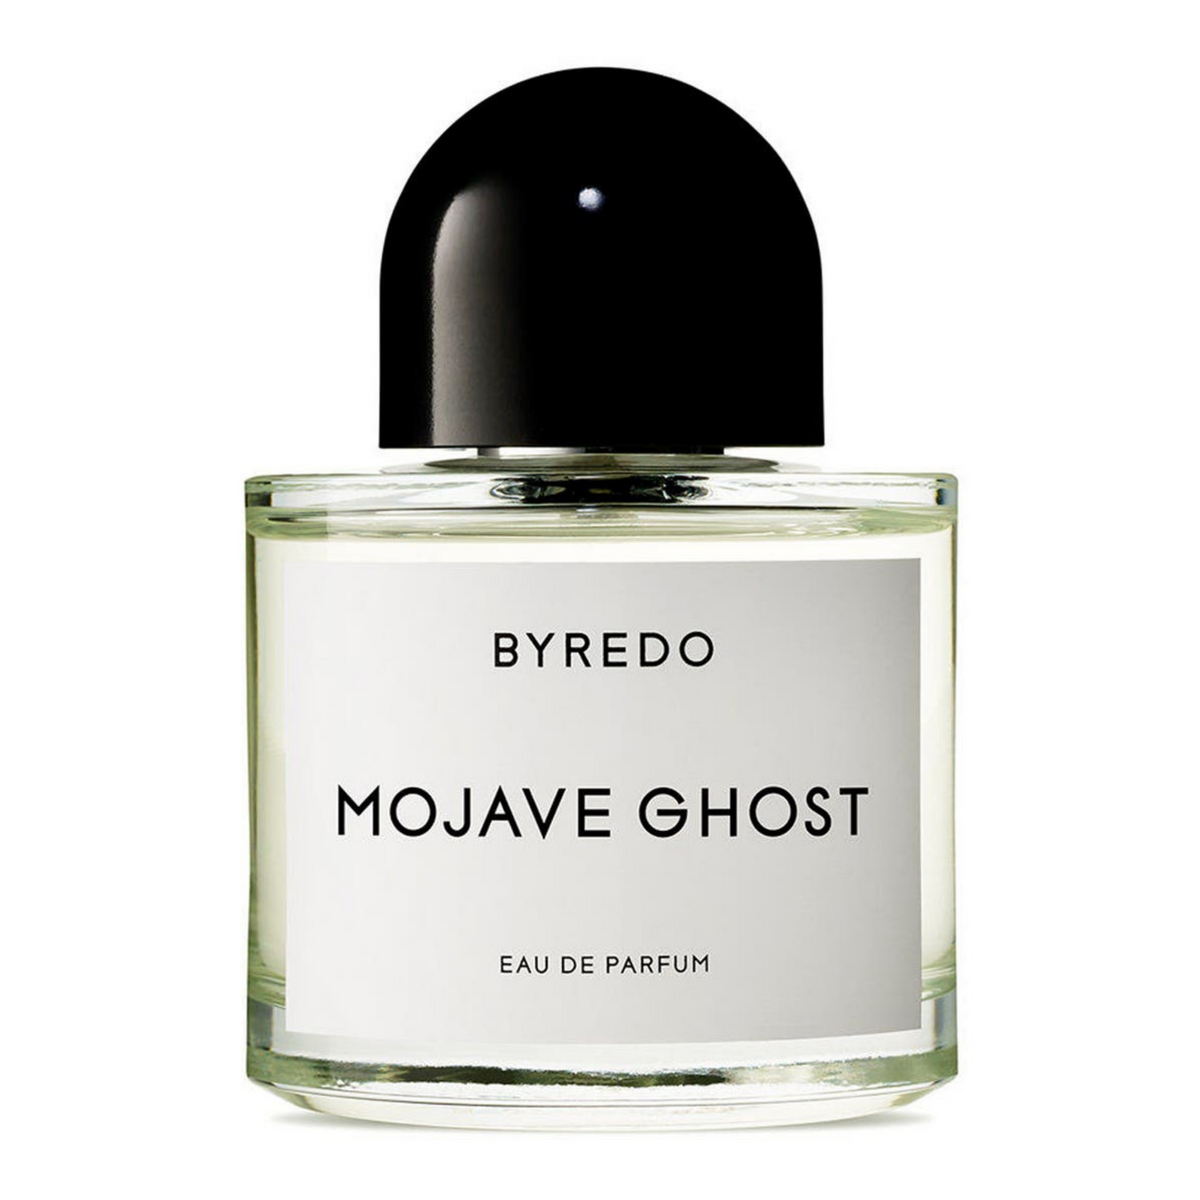 Primary Image of Mojave Ghost EDP